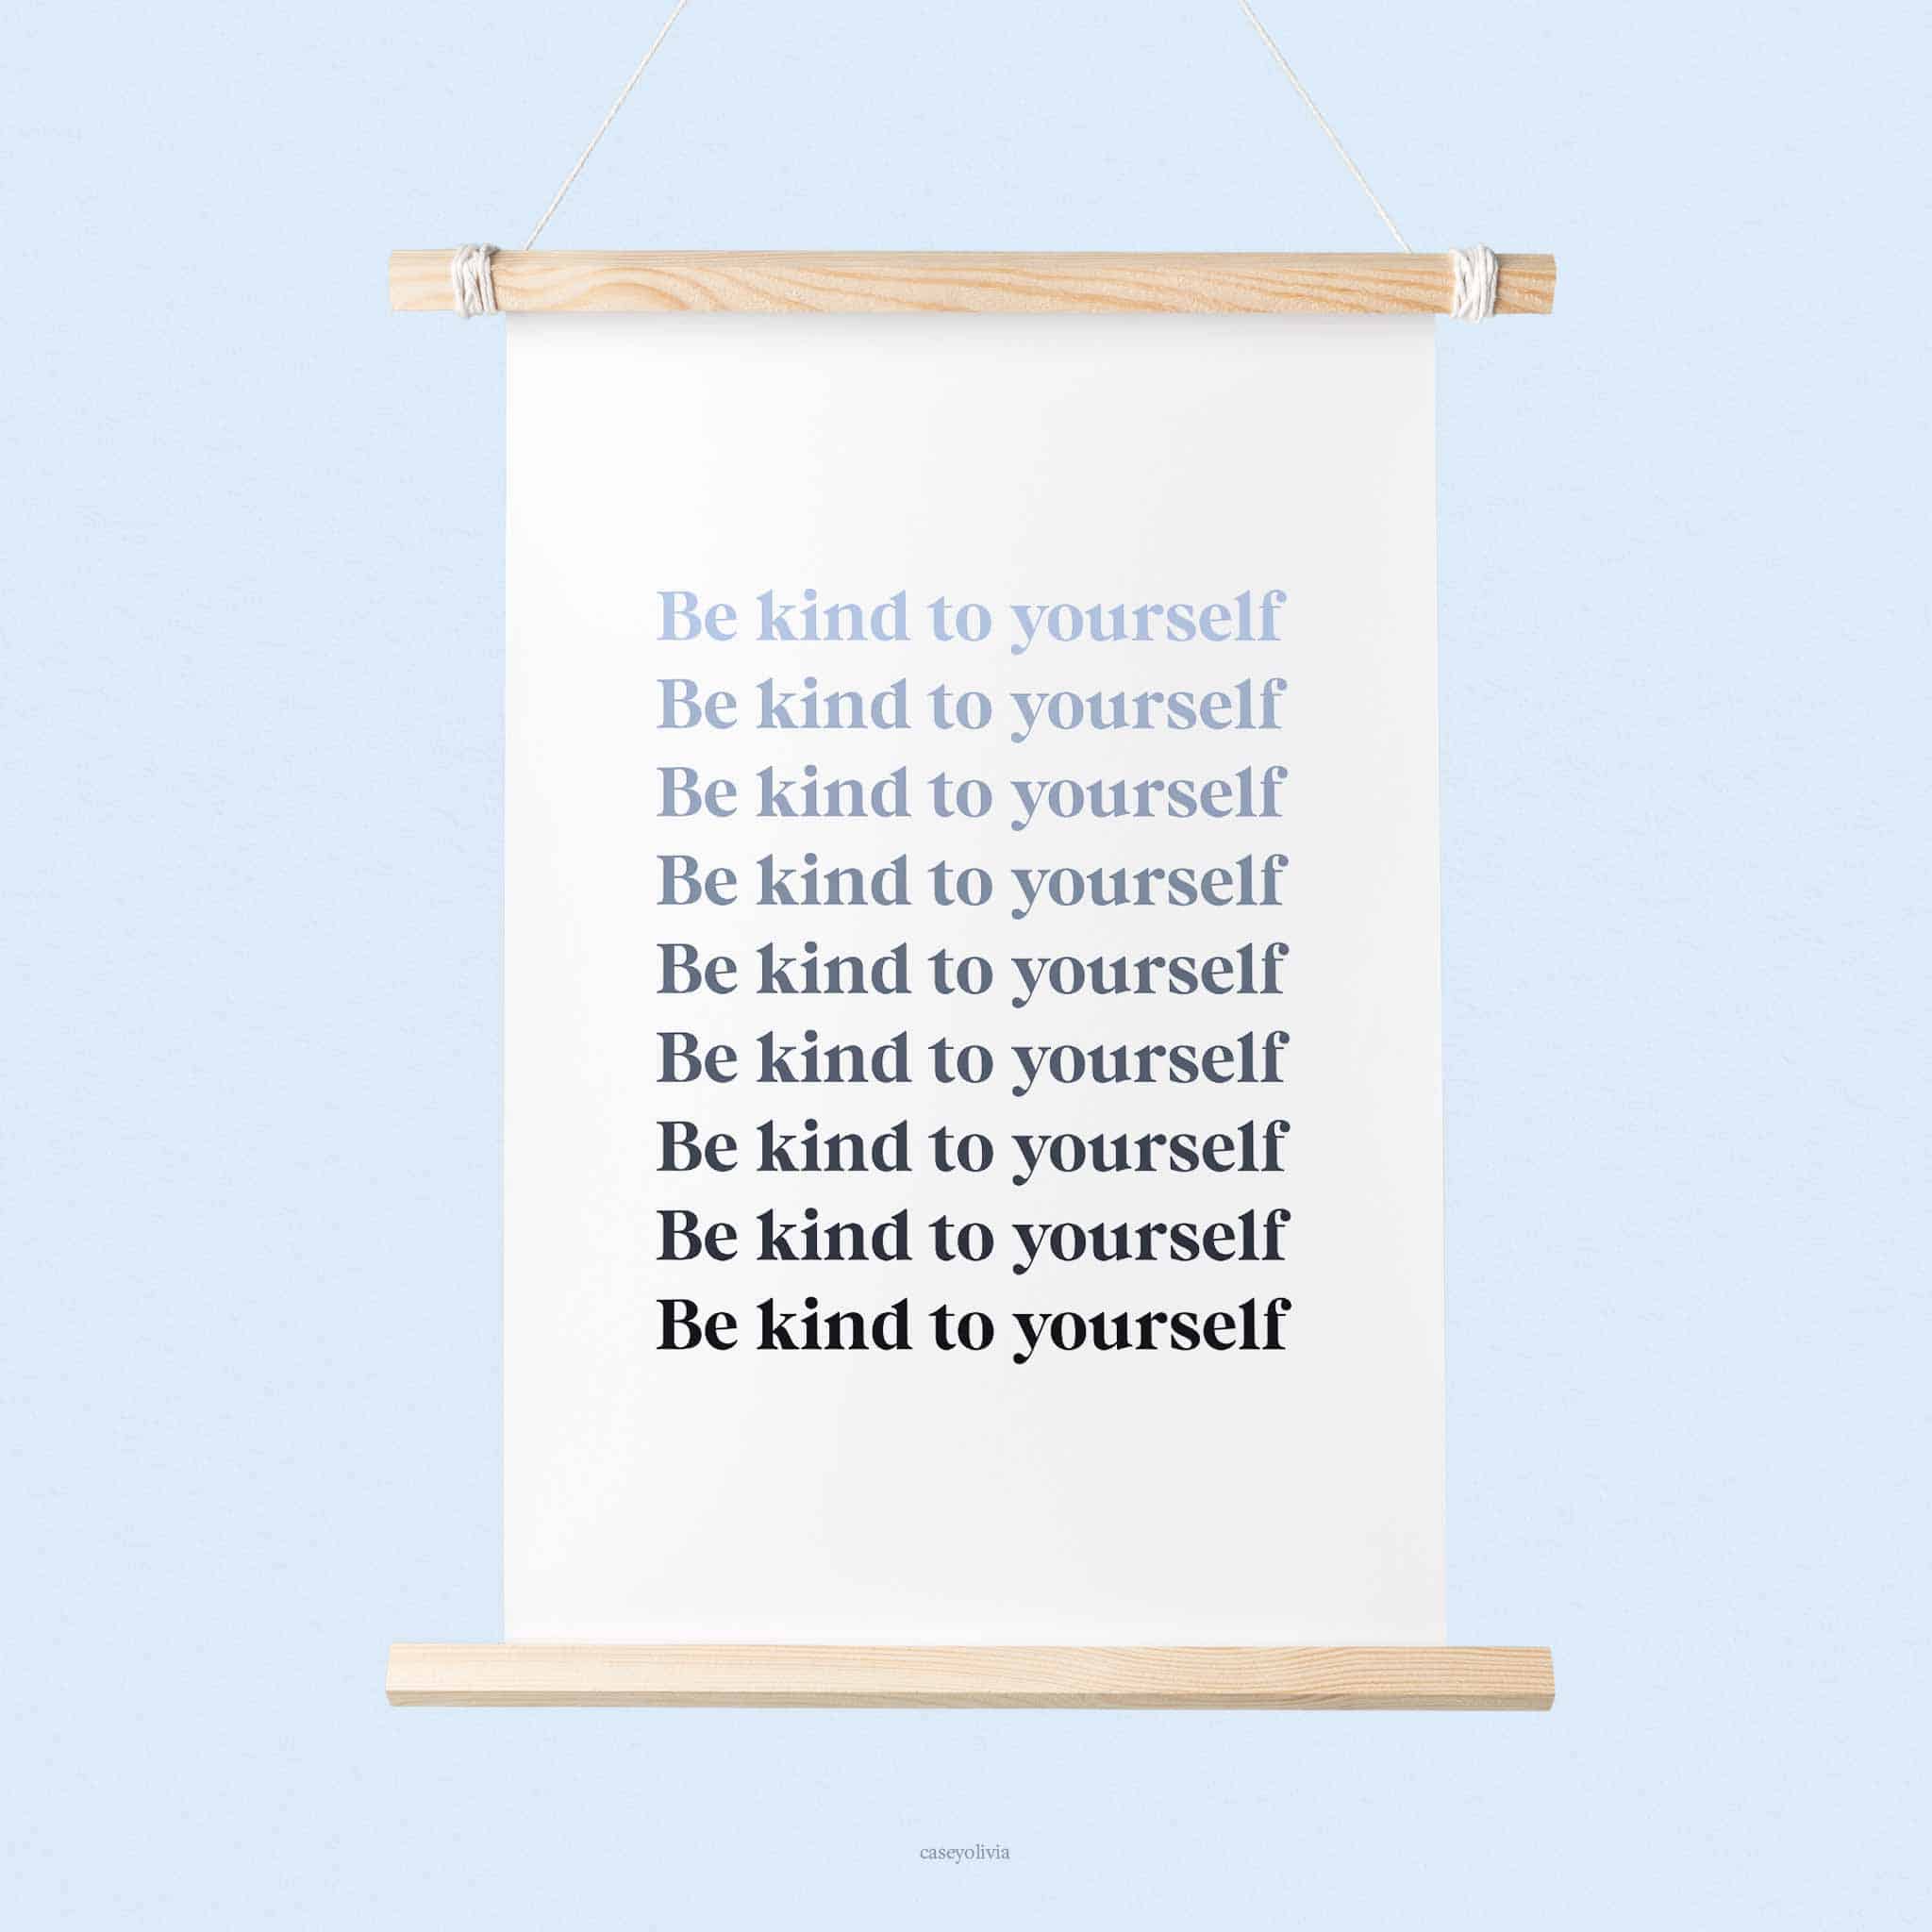 printable quote wall art with be kind to yourself affirmation for self confidence